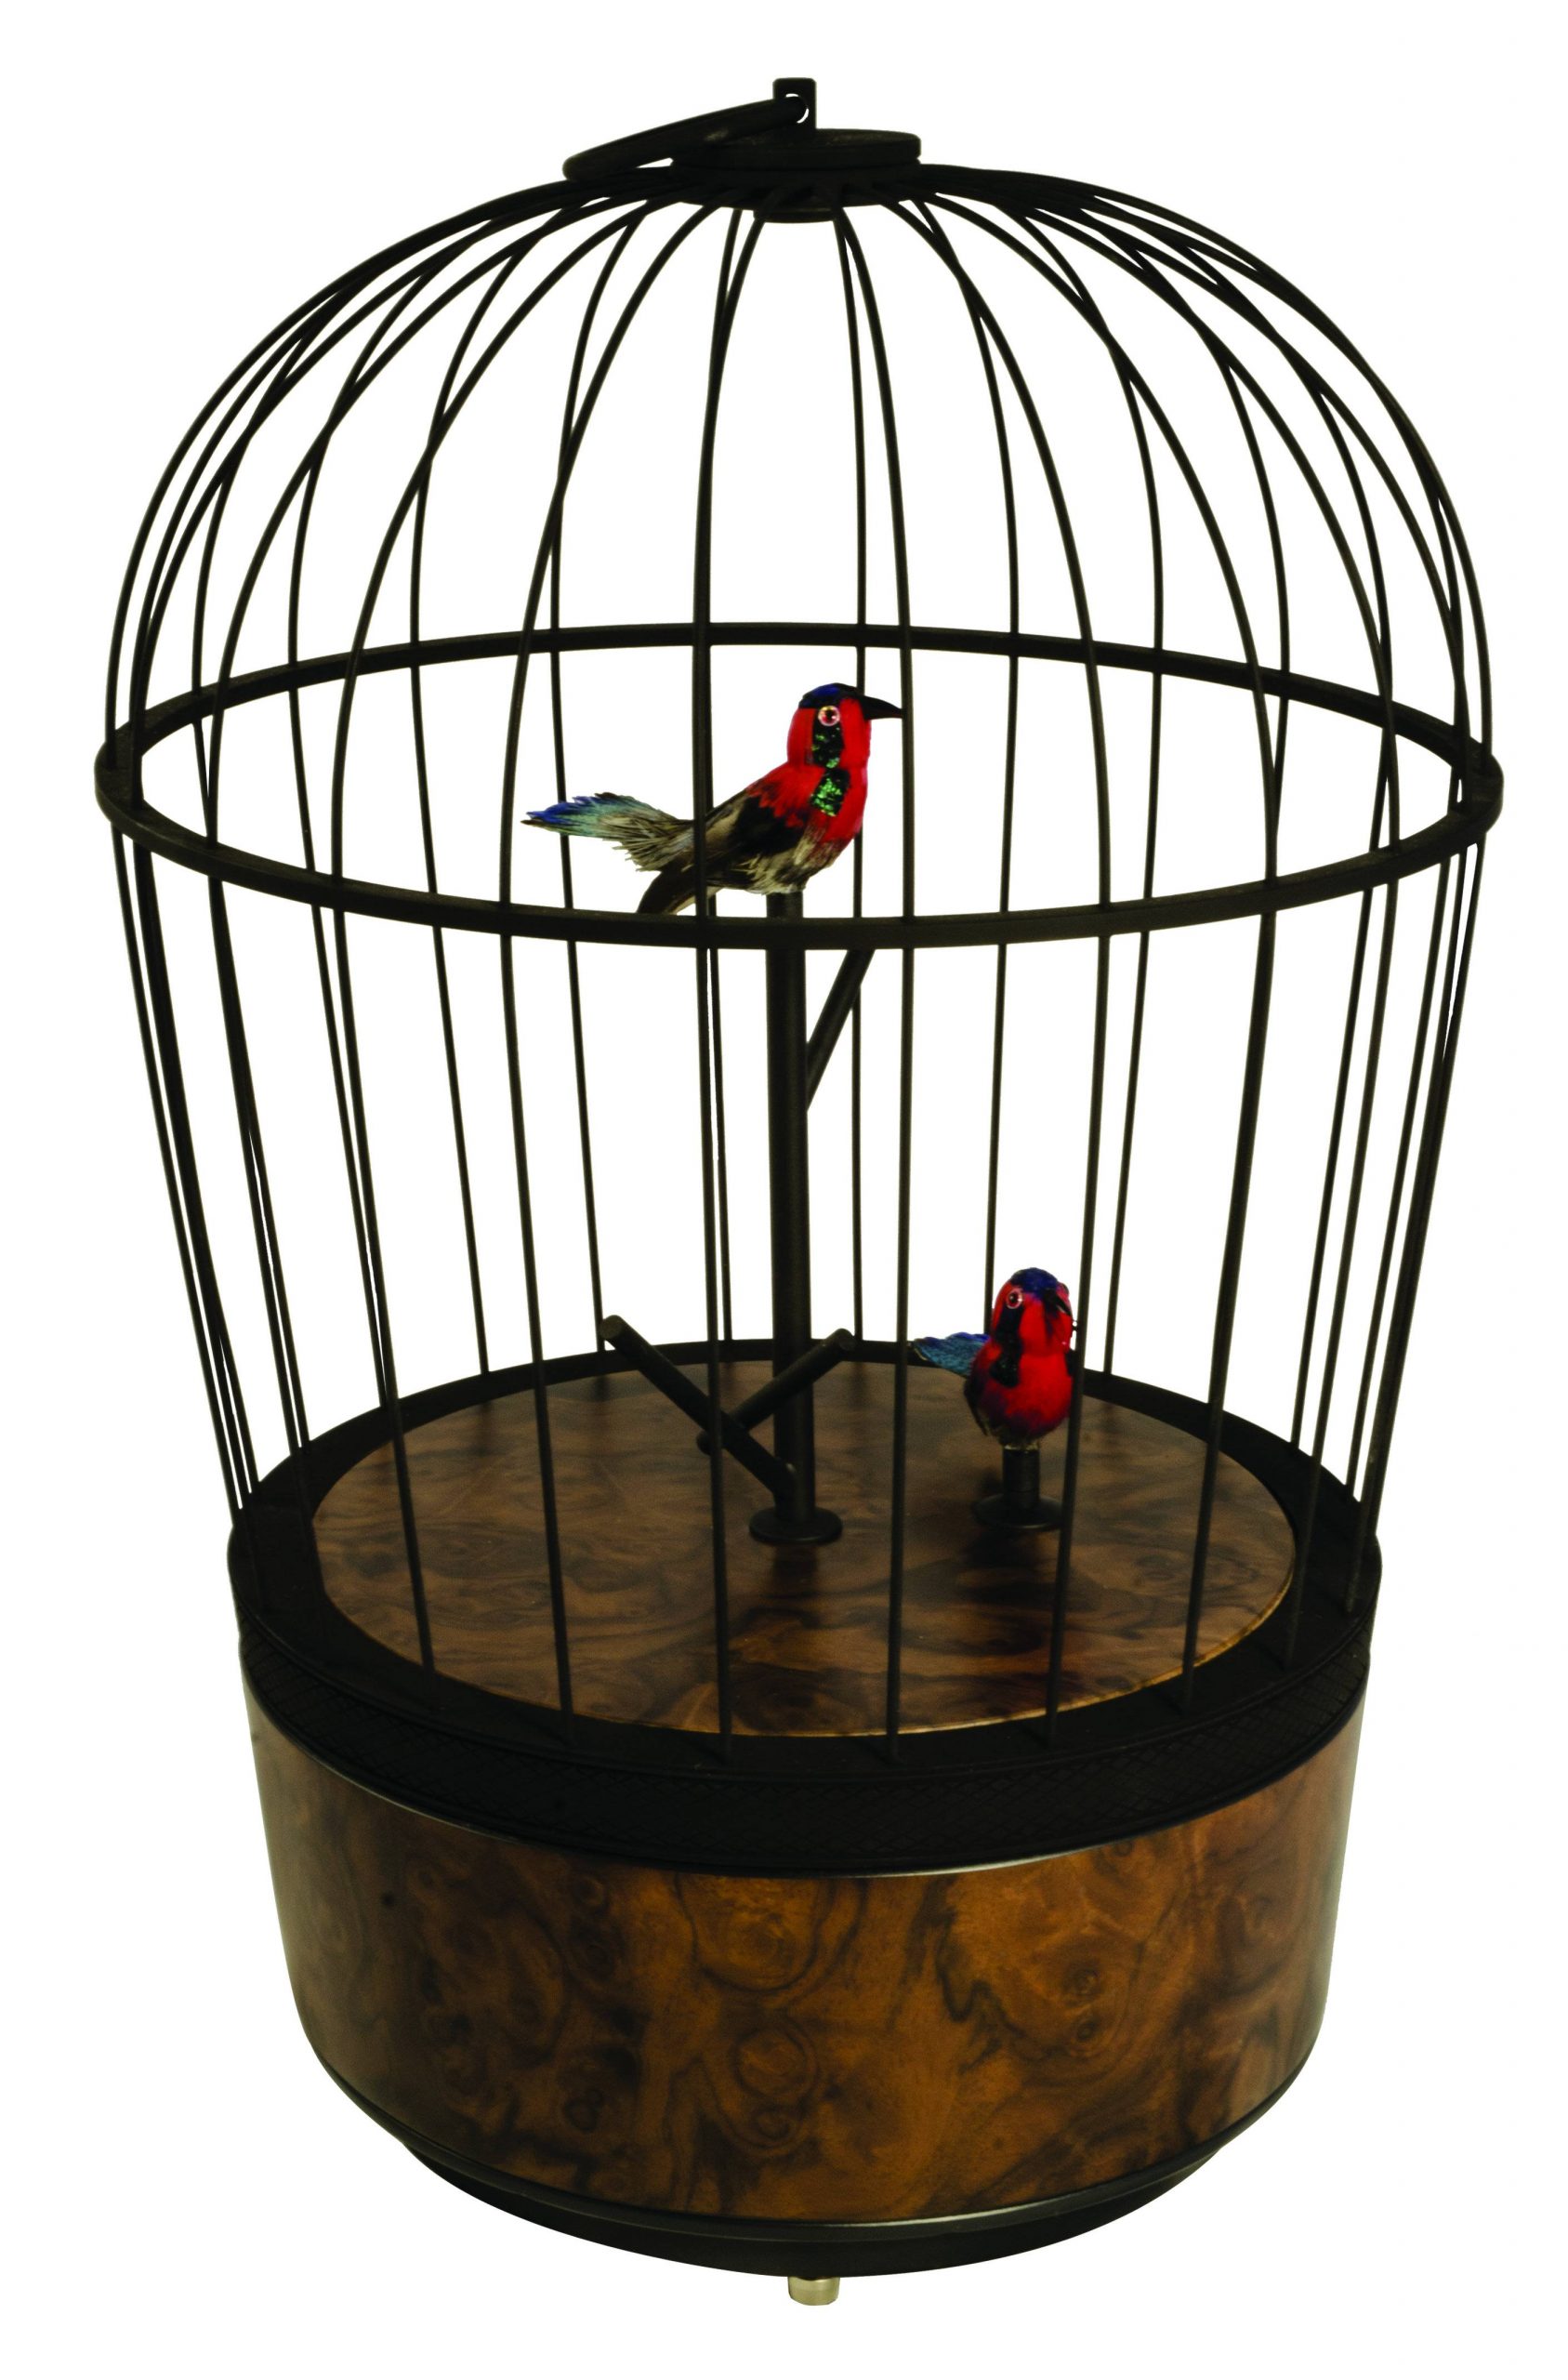 Singapore Singing Bird Cage commissioned by The Hour Glass